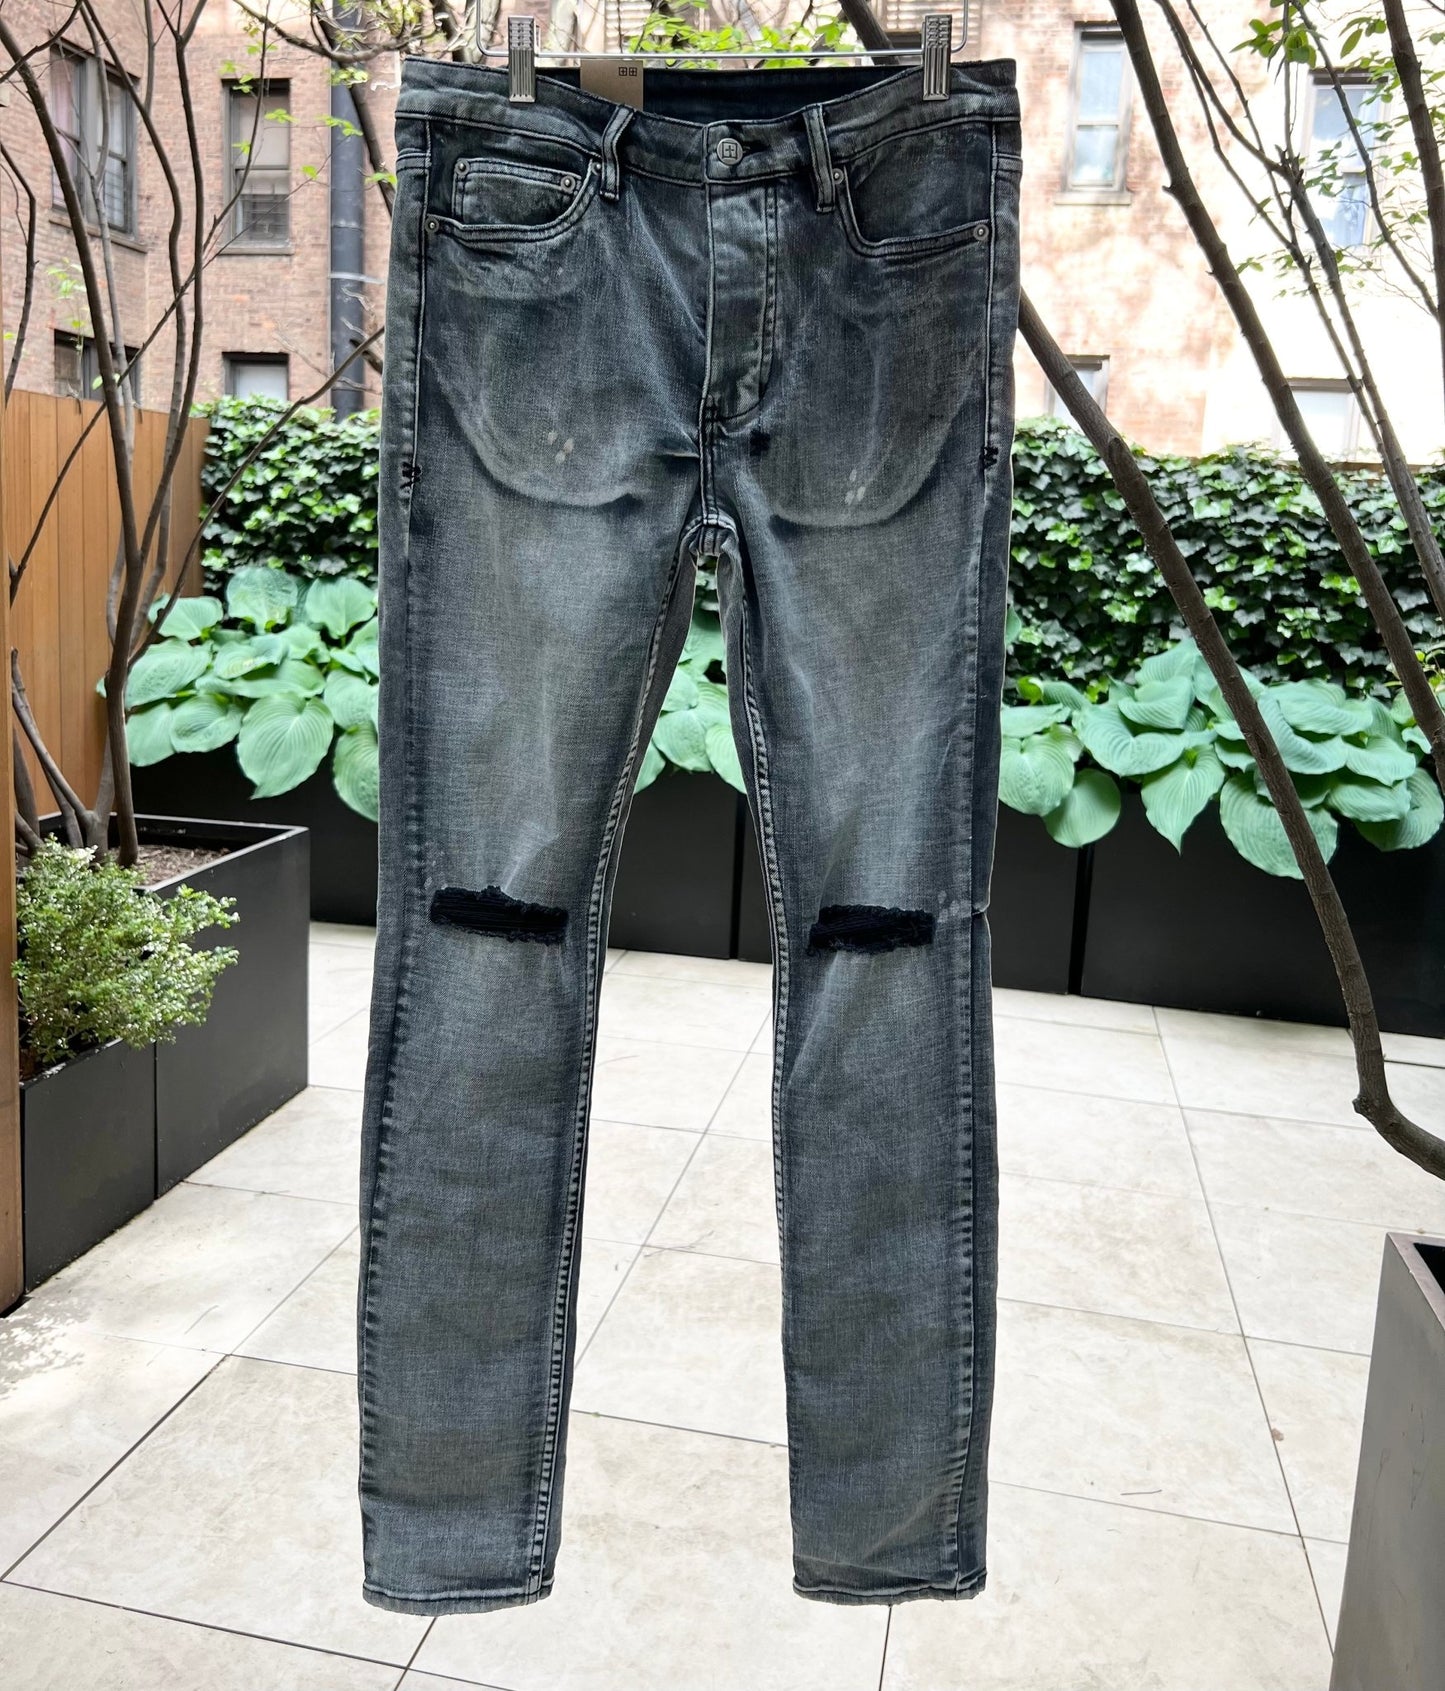 A pair of men's Ksubi CHITCH HYPNOTIZE TRASHED DENIM jeans, model MPF22DJ016, hanging on a hanger in front of a tree.